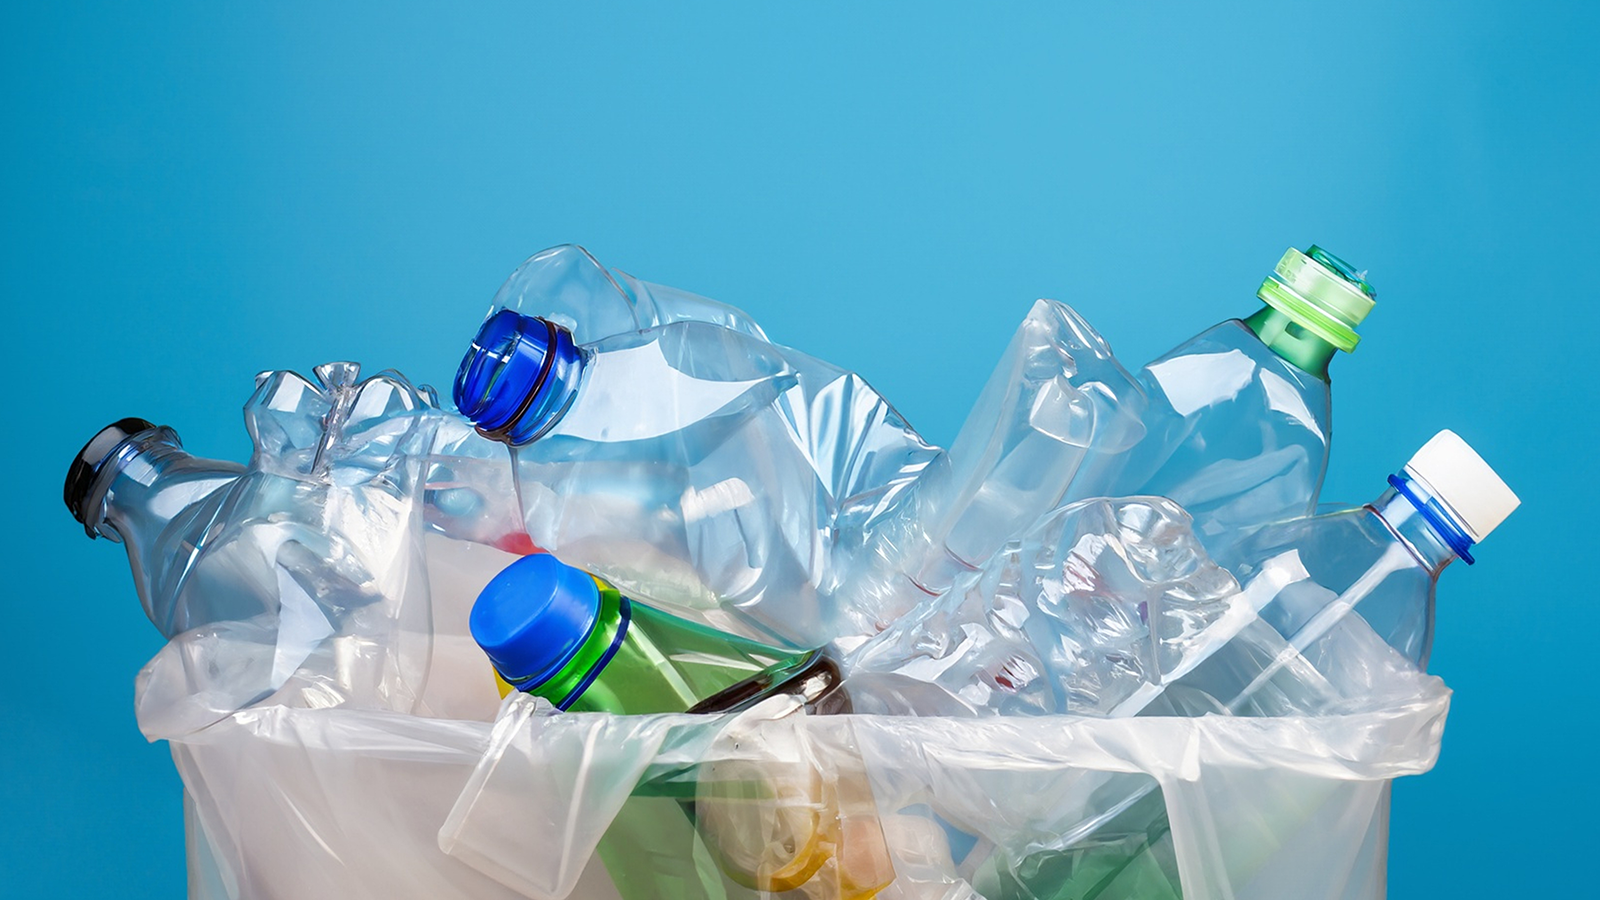 Replacing plastics with alternatives not always better for the environment, study finds